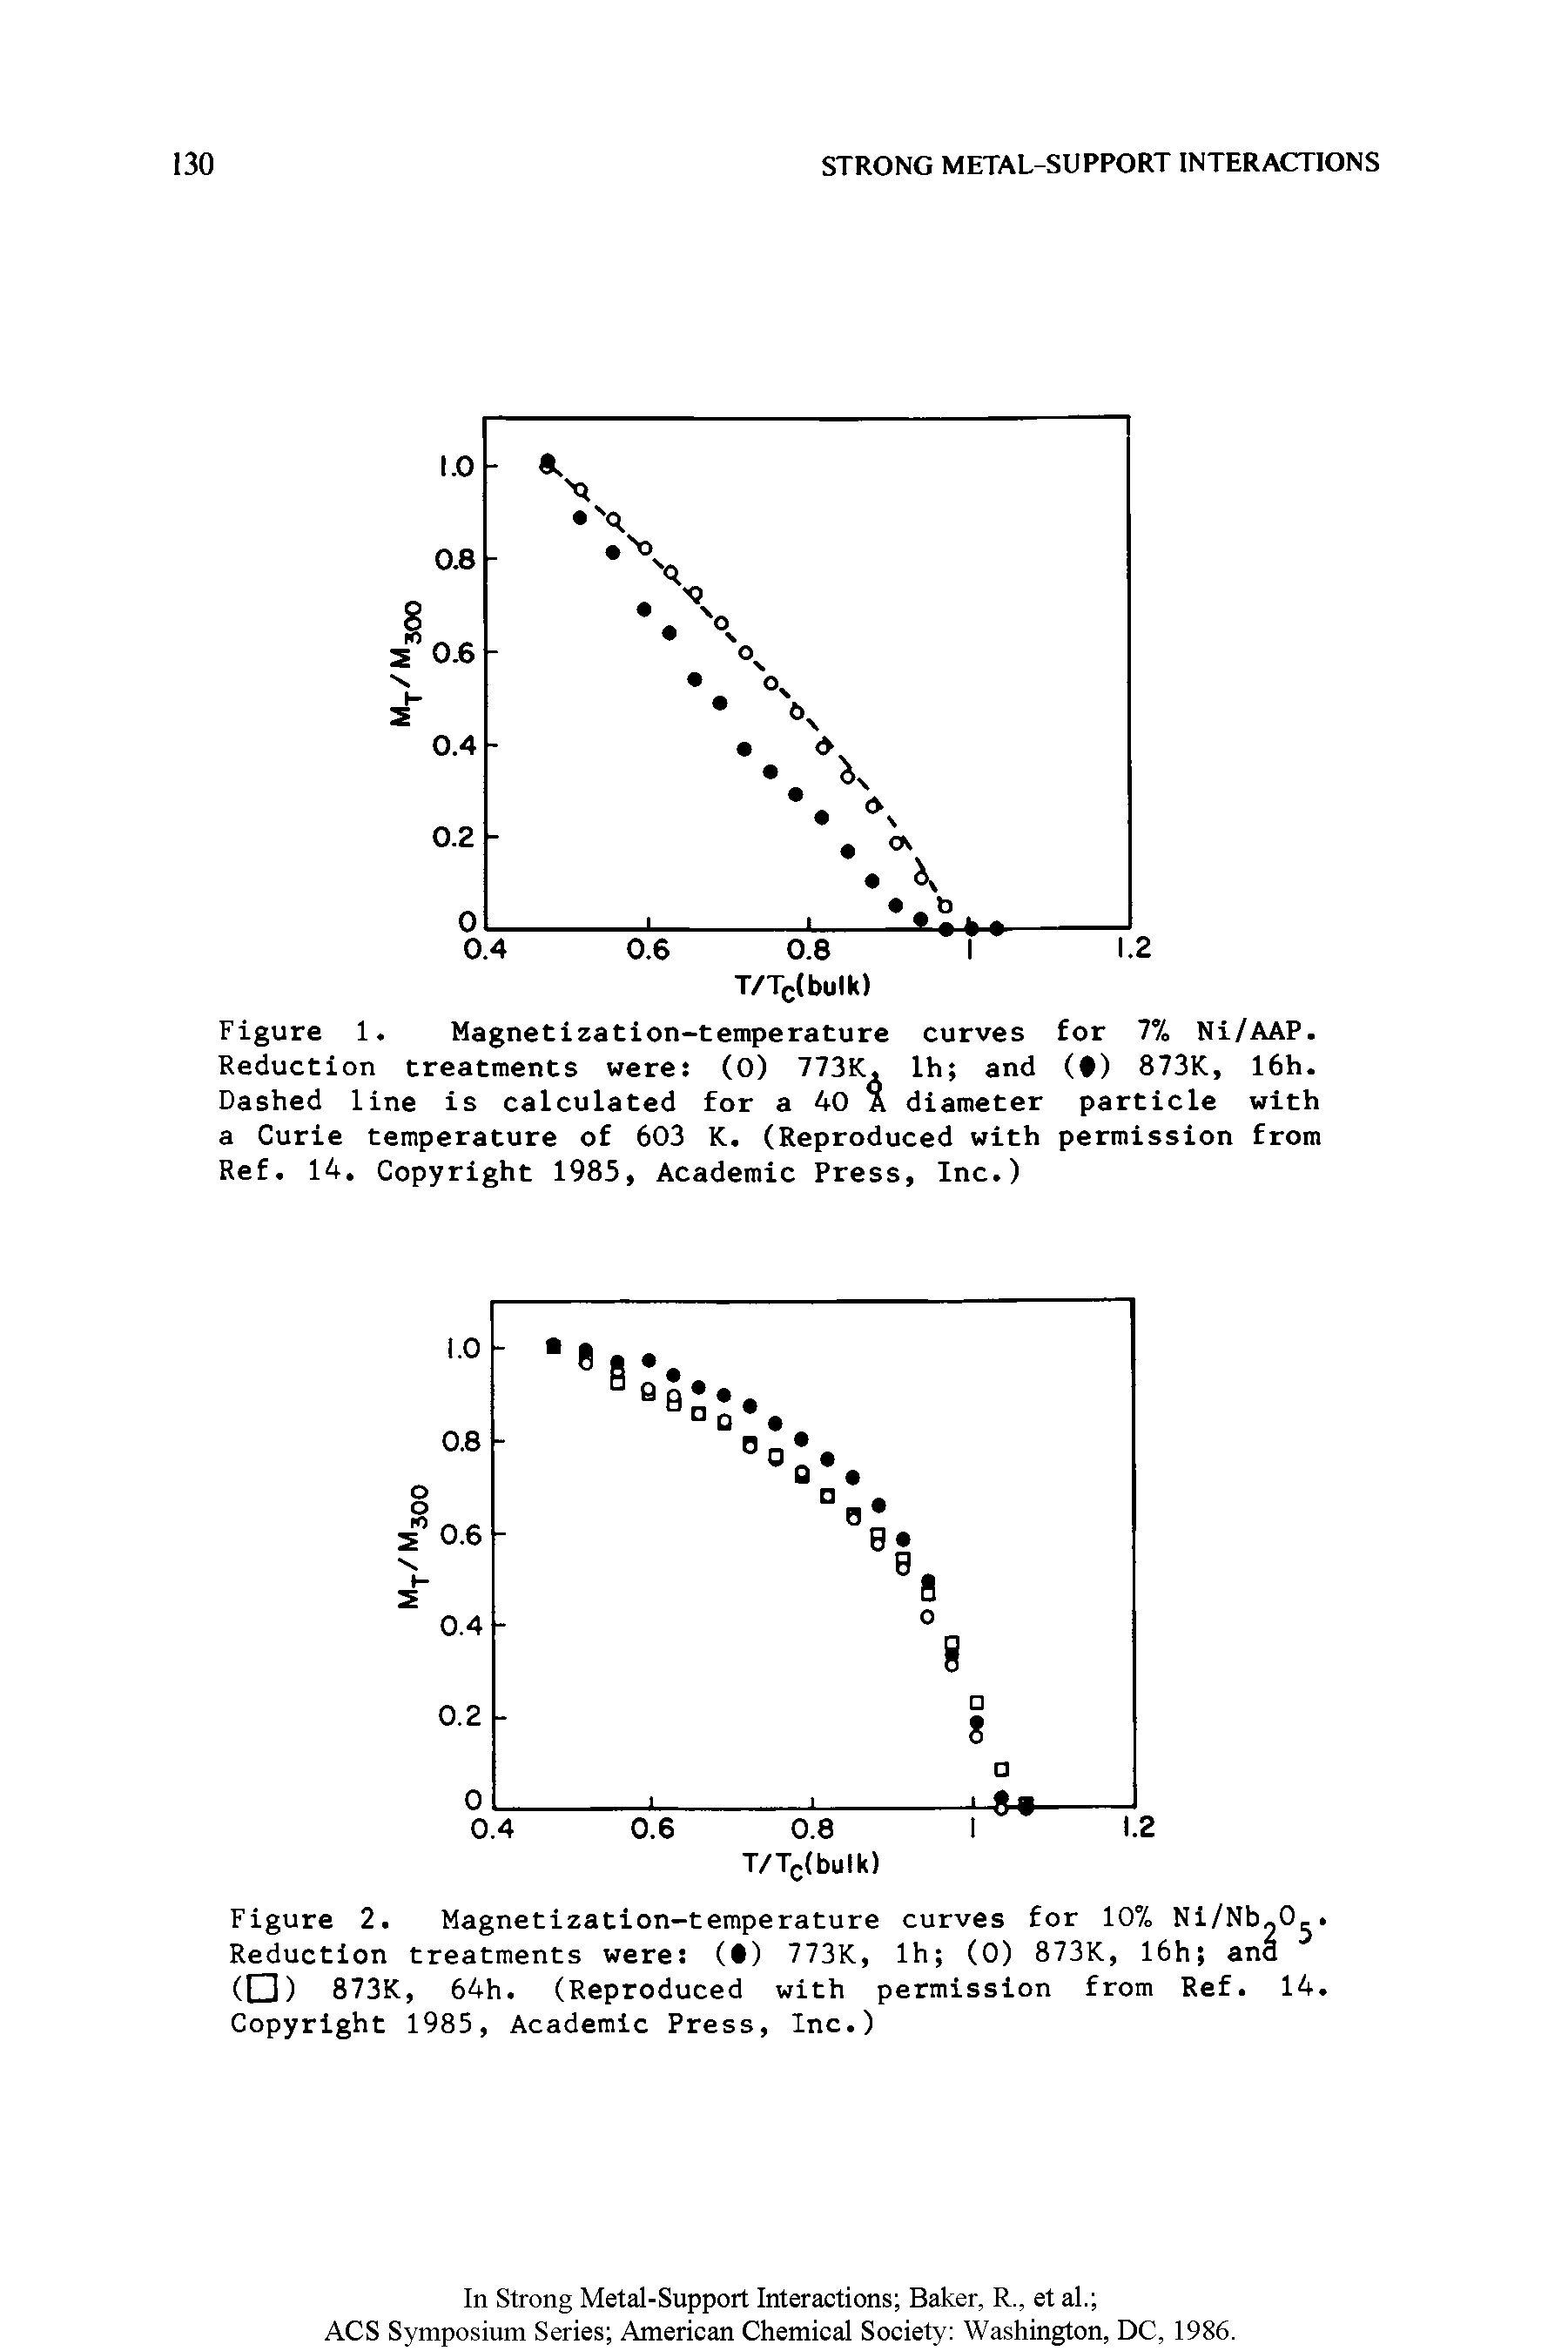 Figure 1. Magnetization-temperature curves for 7%, Ni/AAP. Reduction treatments were (0) 773K, lh and ( ) 873K, 16h. Dashed line is calculated for a 40 A diameter particle with a Curie temperature of 603 K. (Reproduced with permission from Ref. 14. Copyright 1985, Academic Press, Inc.)...